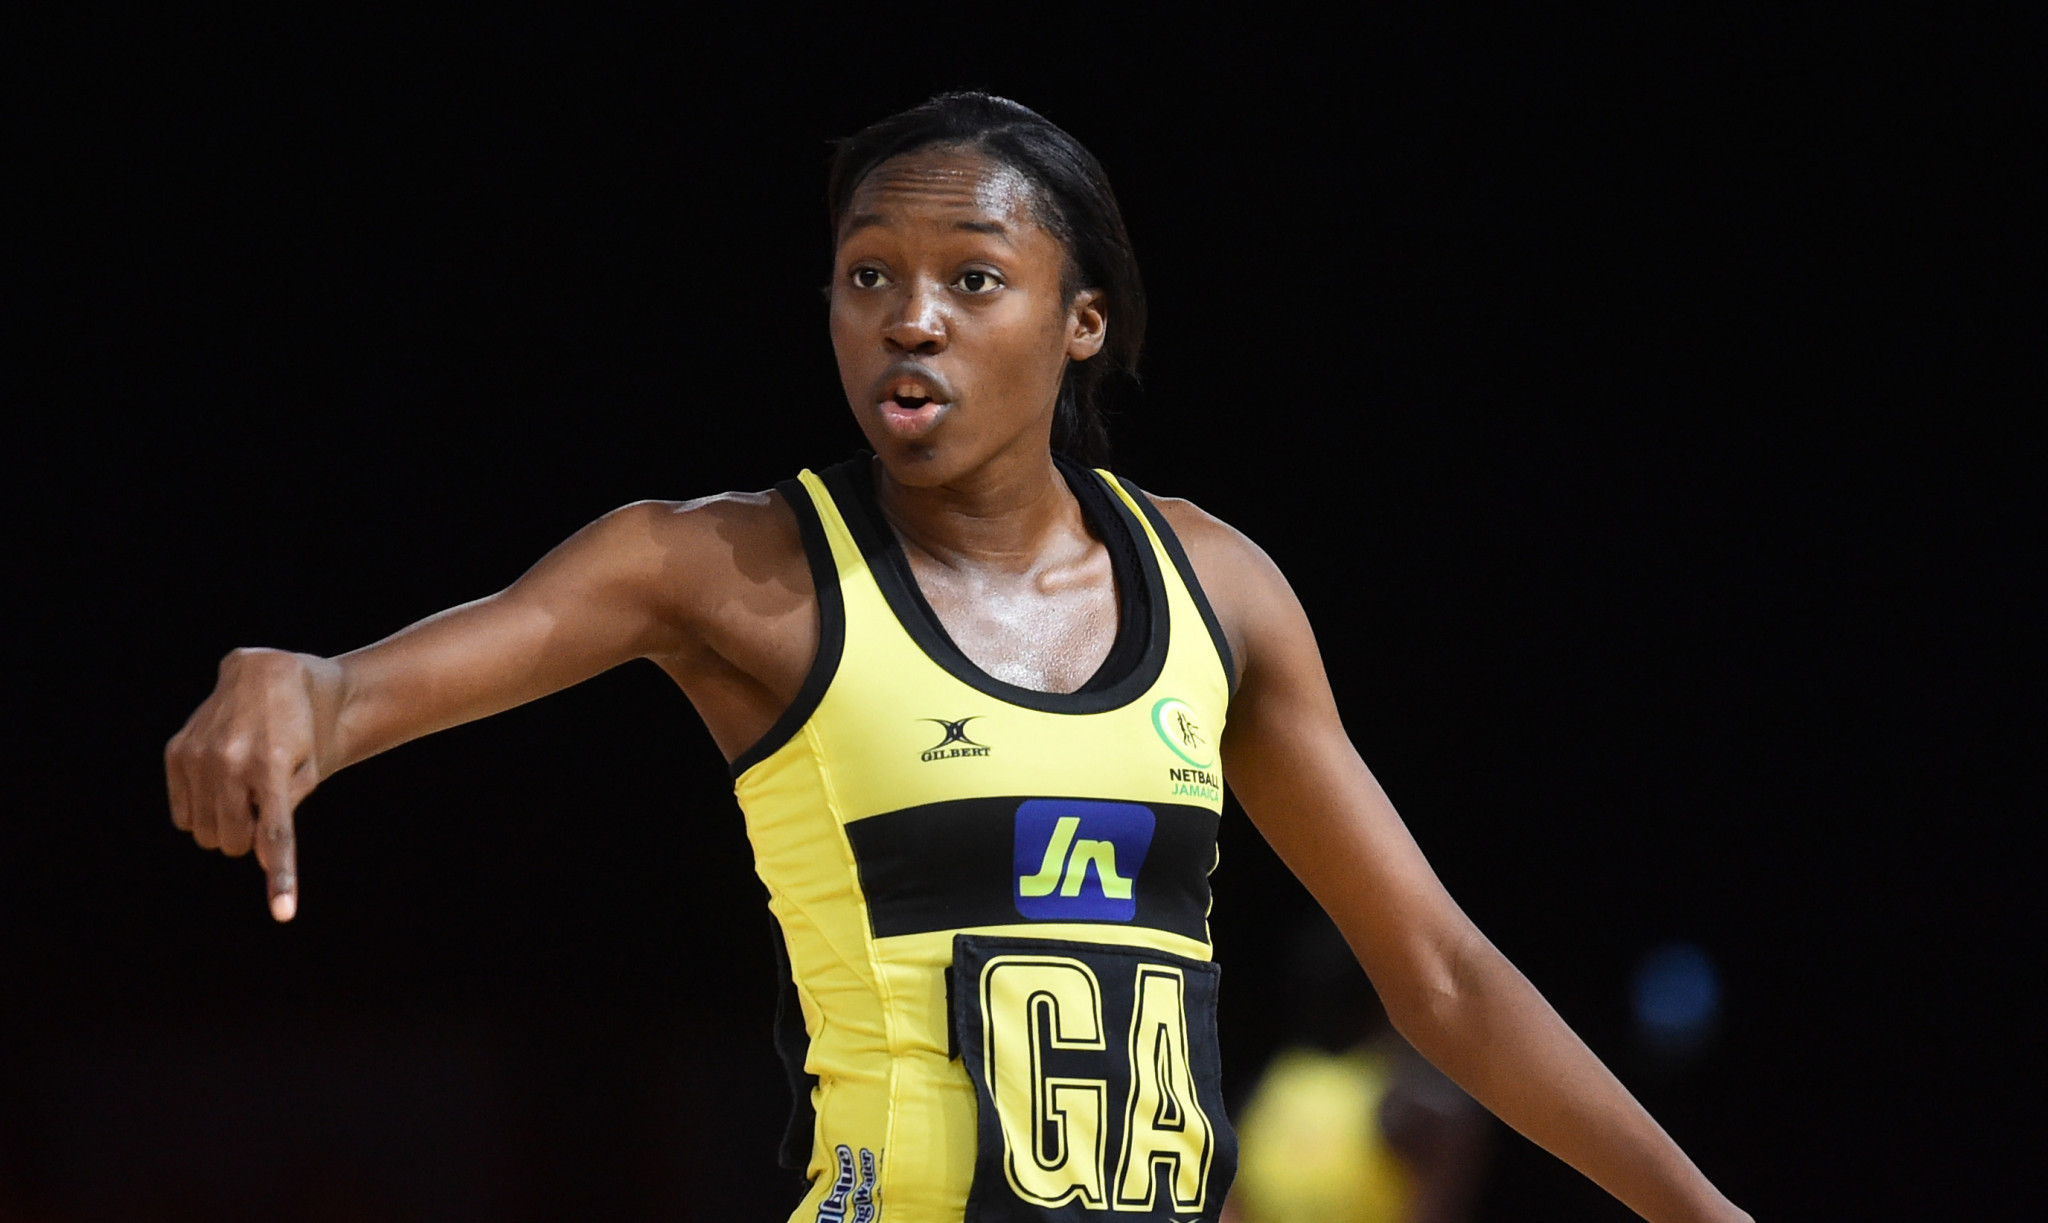 Jamaica finished fifth at last year's Netball World Cup ©Getty Images